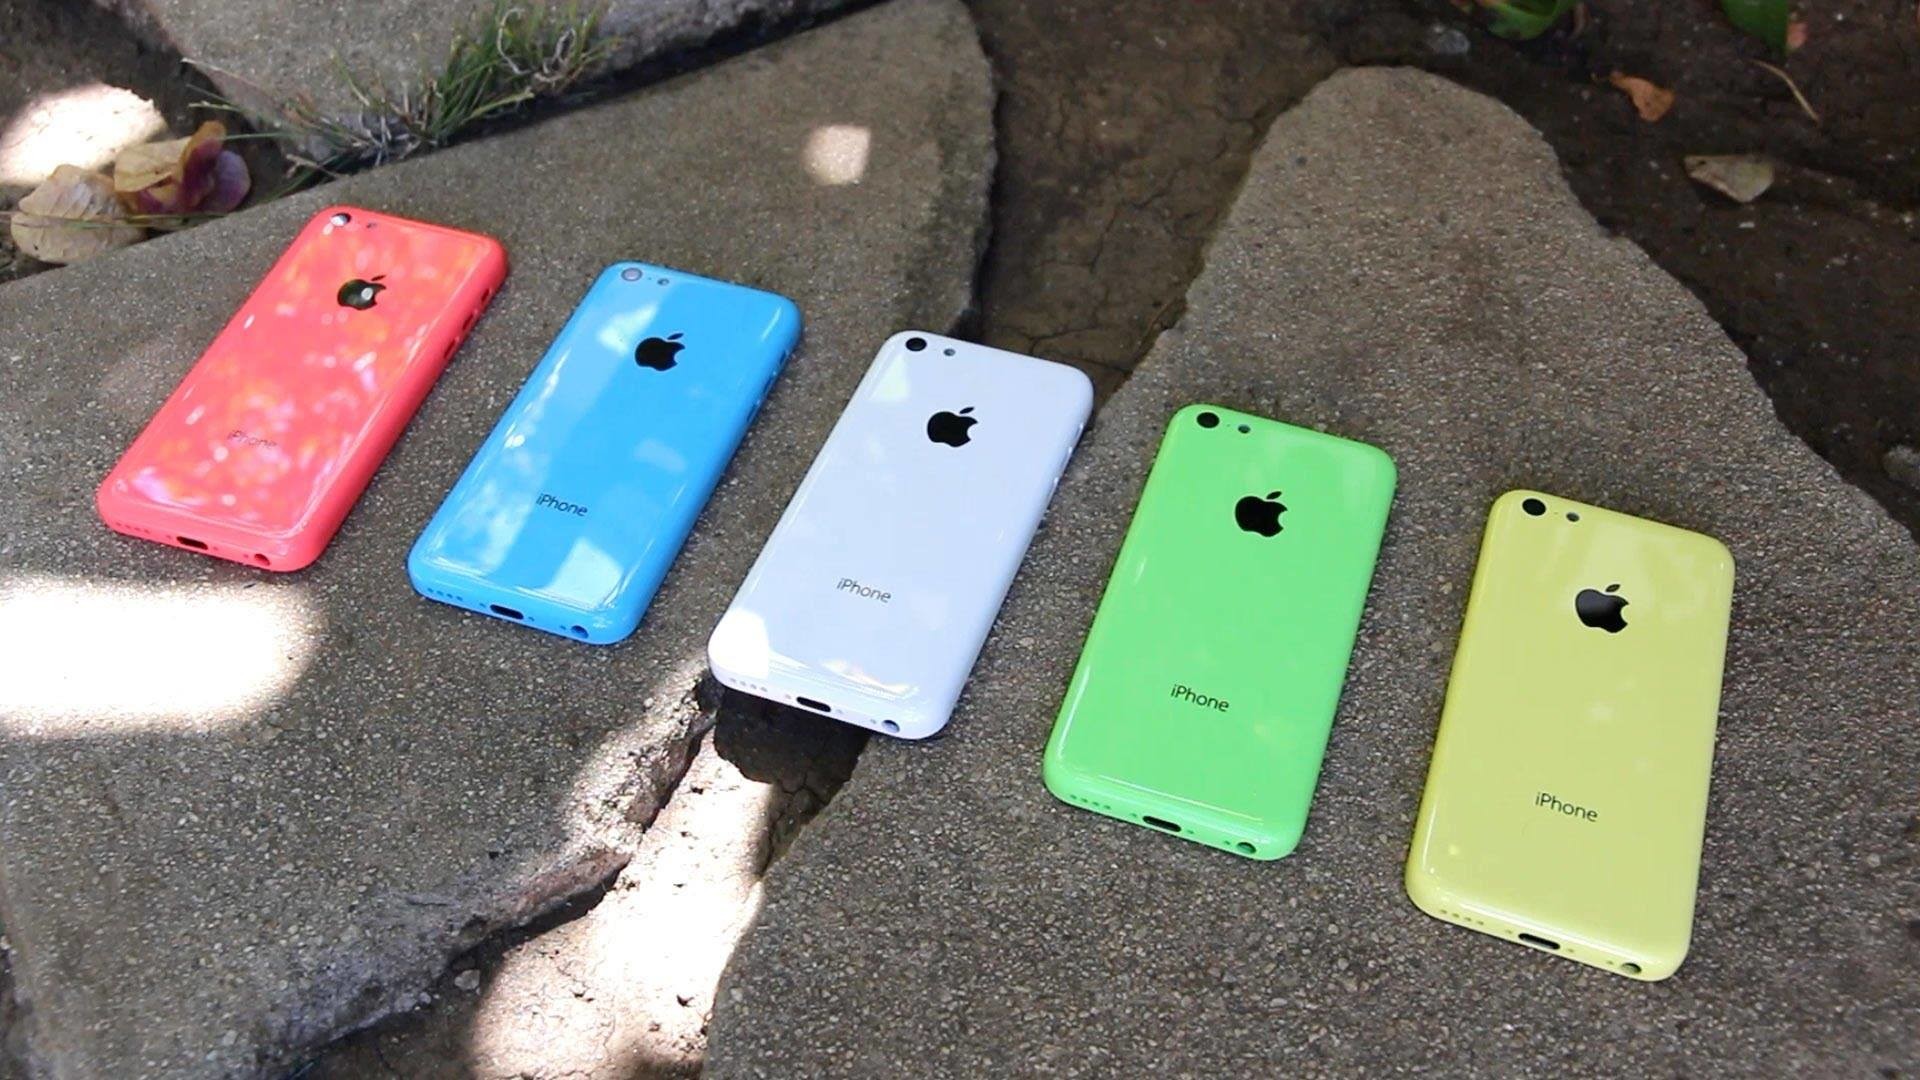 1920x1080 ... wallpapers now; apple iphone 5c emerged for less on european market  guardian ...